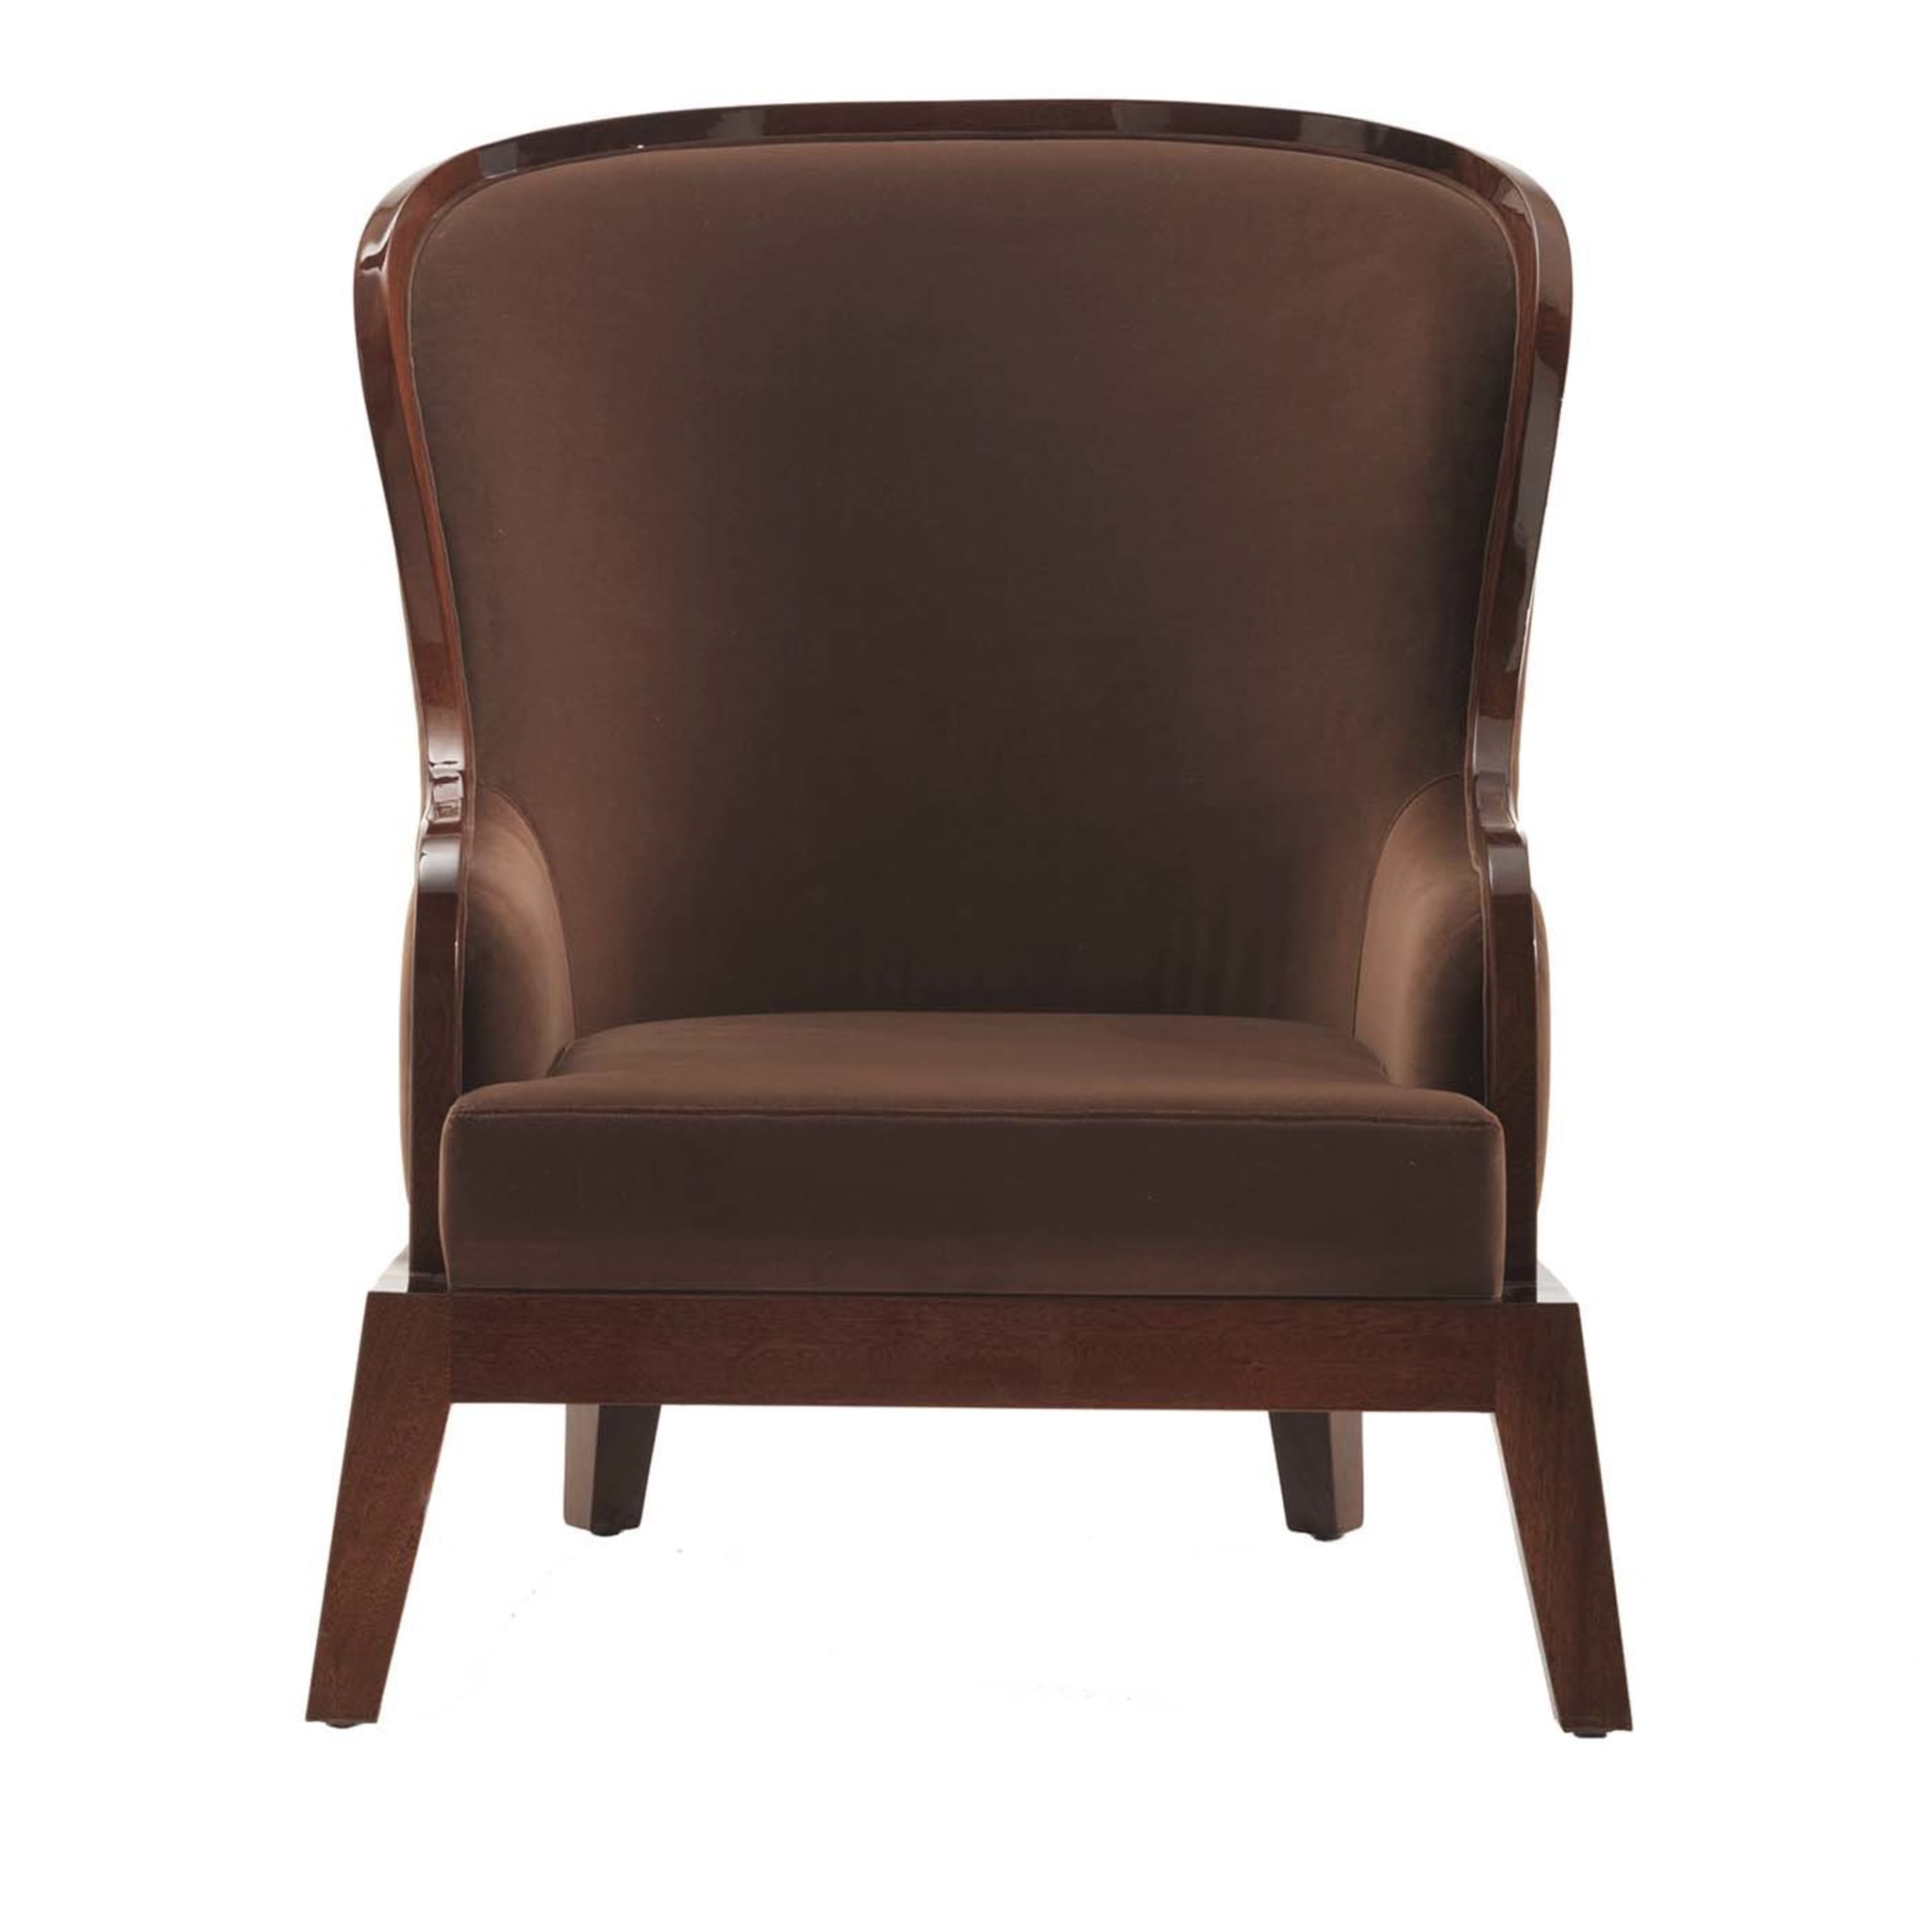 Curzon Armchair by Archer Humphryes Architects - Main view